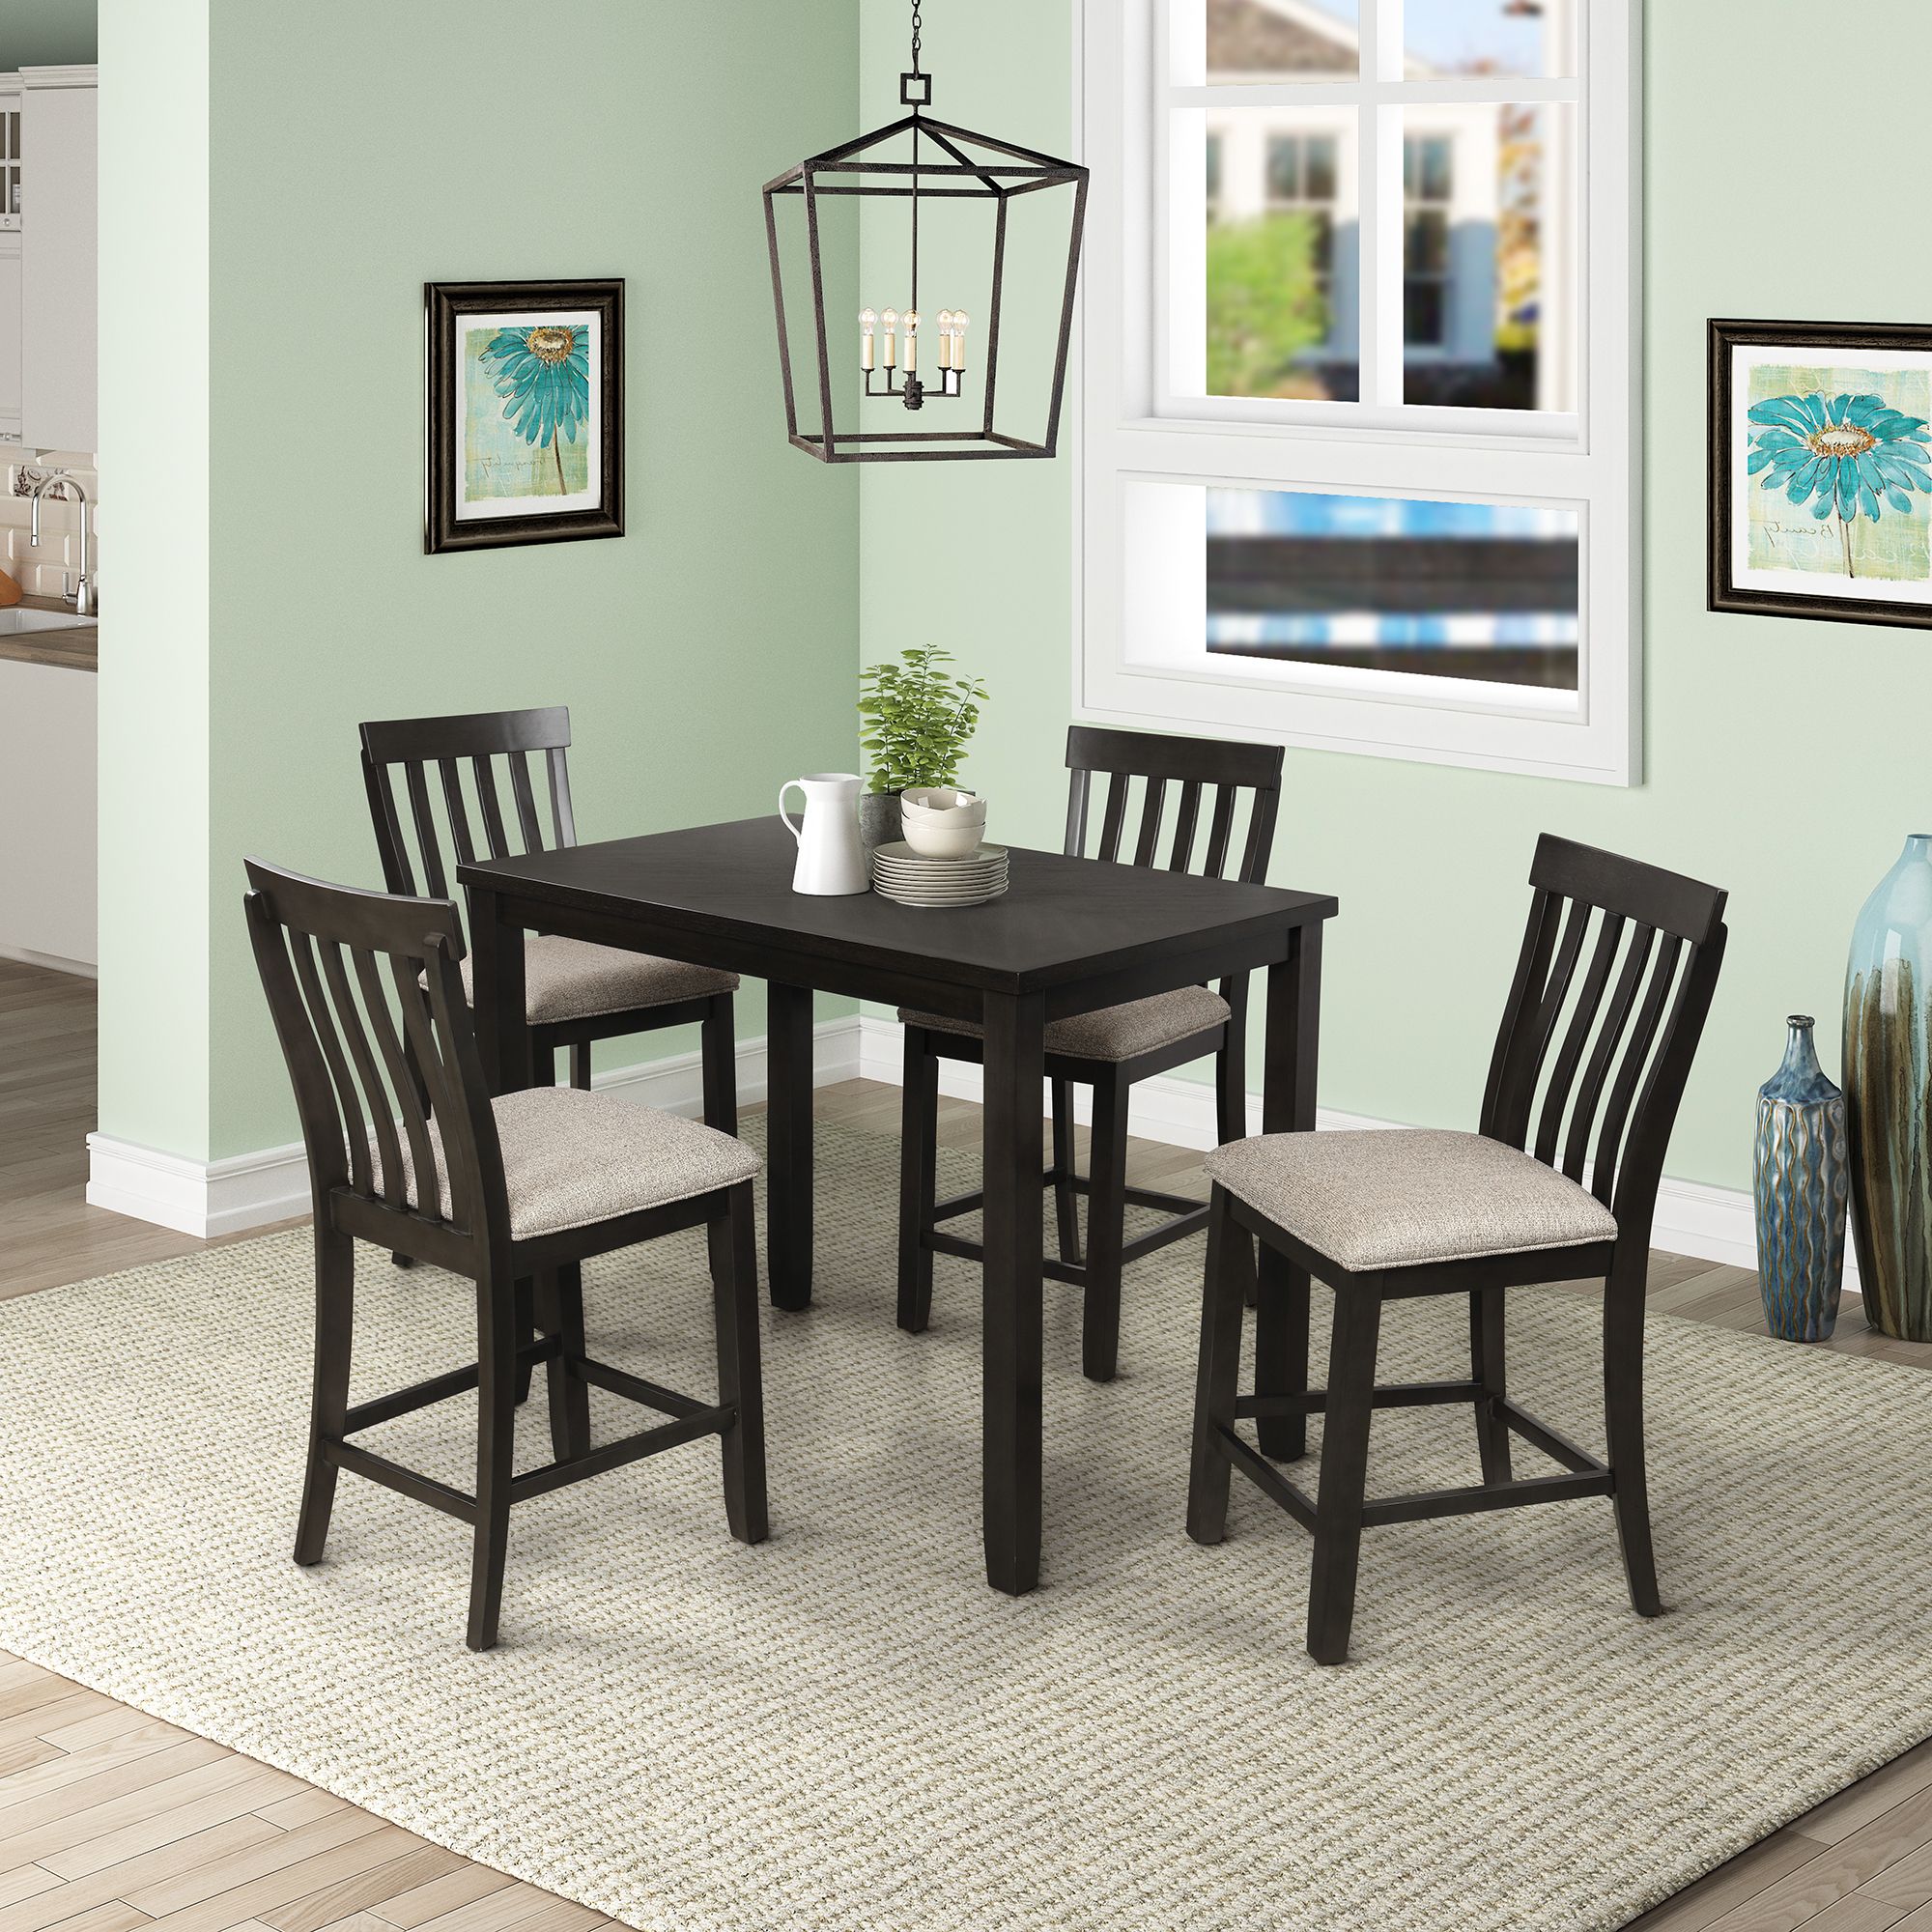 Wood Bistro Table And Chairs Sets Pertaining To Most Popular 5 Pieces Counter Height Dining Table Set, Rectangular Wood Kitchen (View 8 of 15)